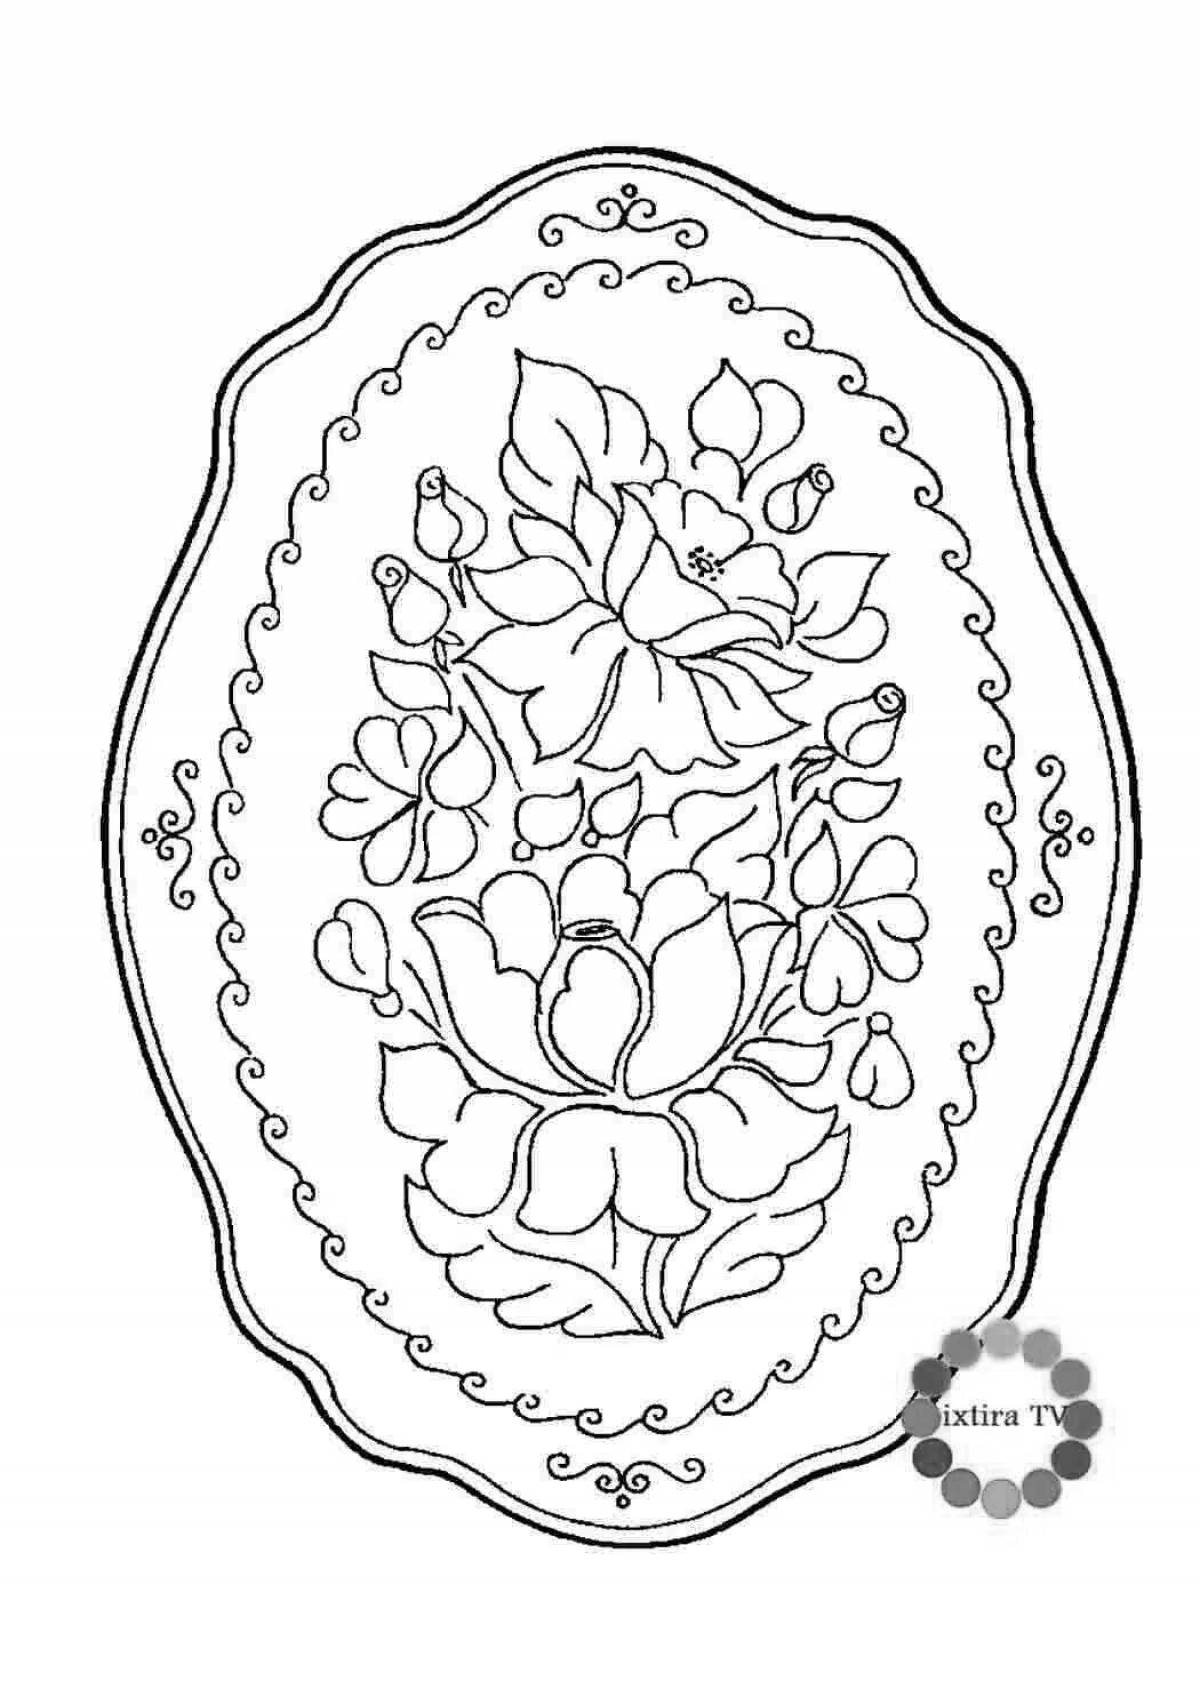 Charming Zhostovo tray coloring for kids